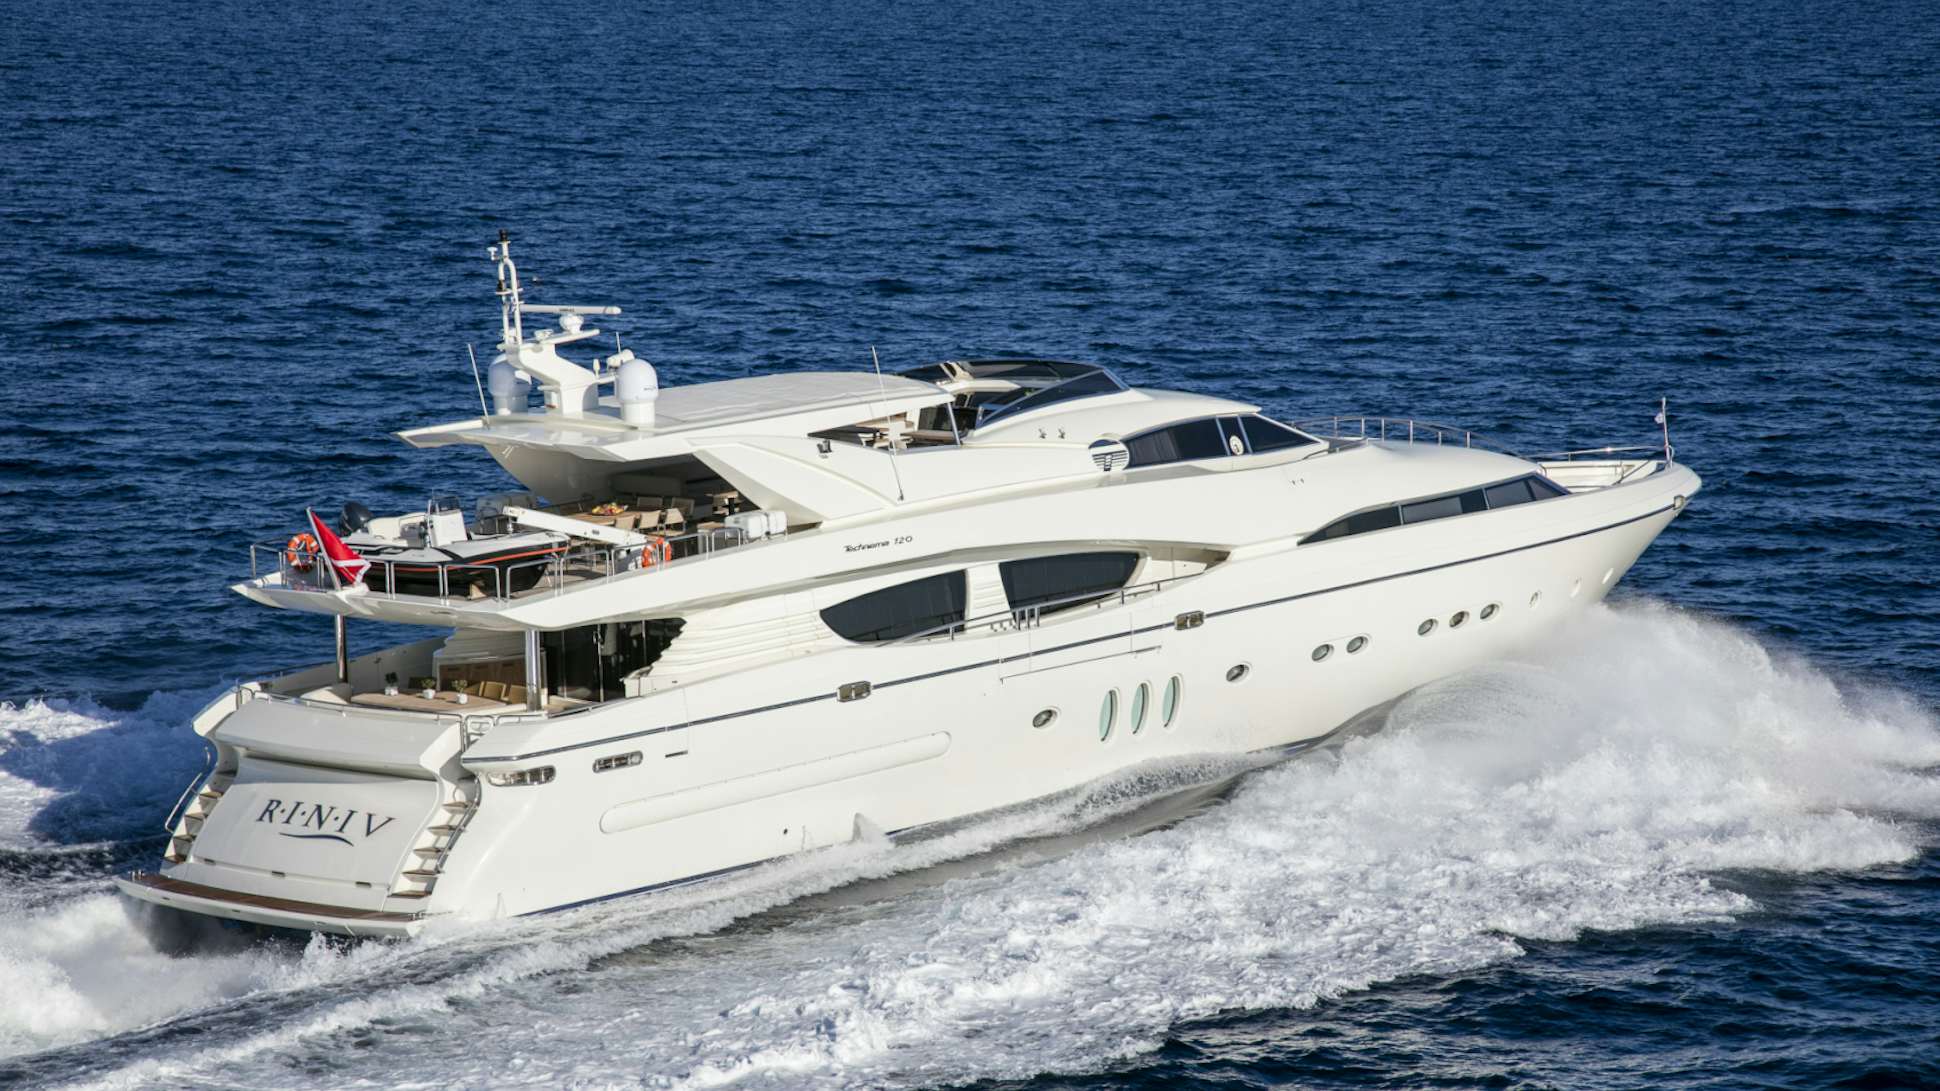 Watch Video for RINI V Yacht for Charter